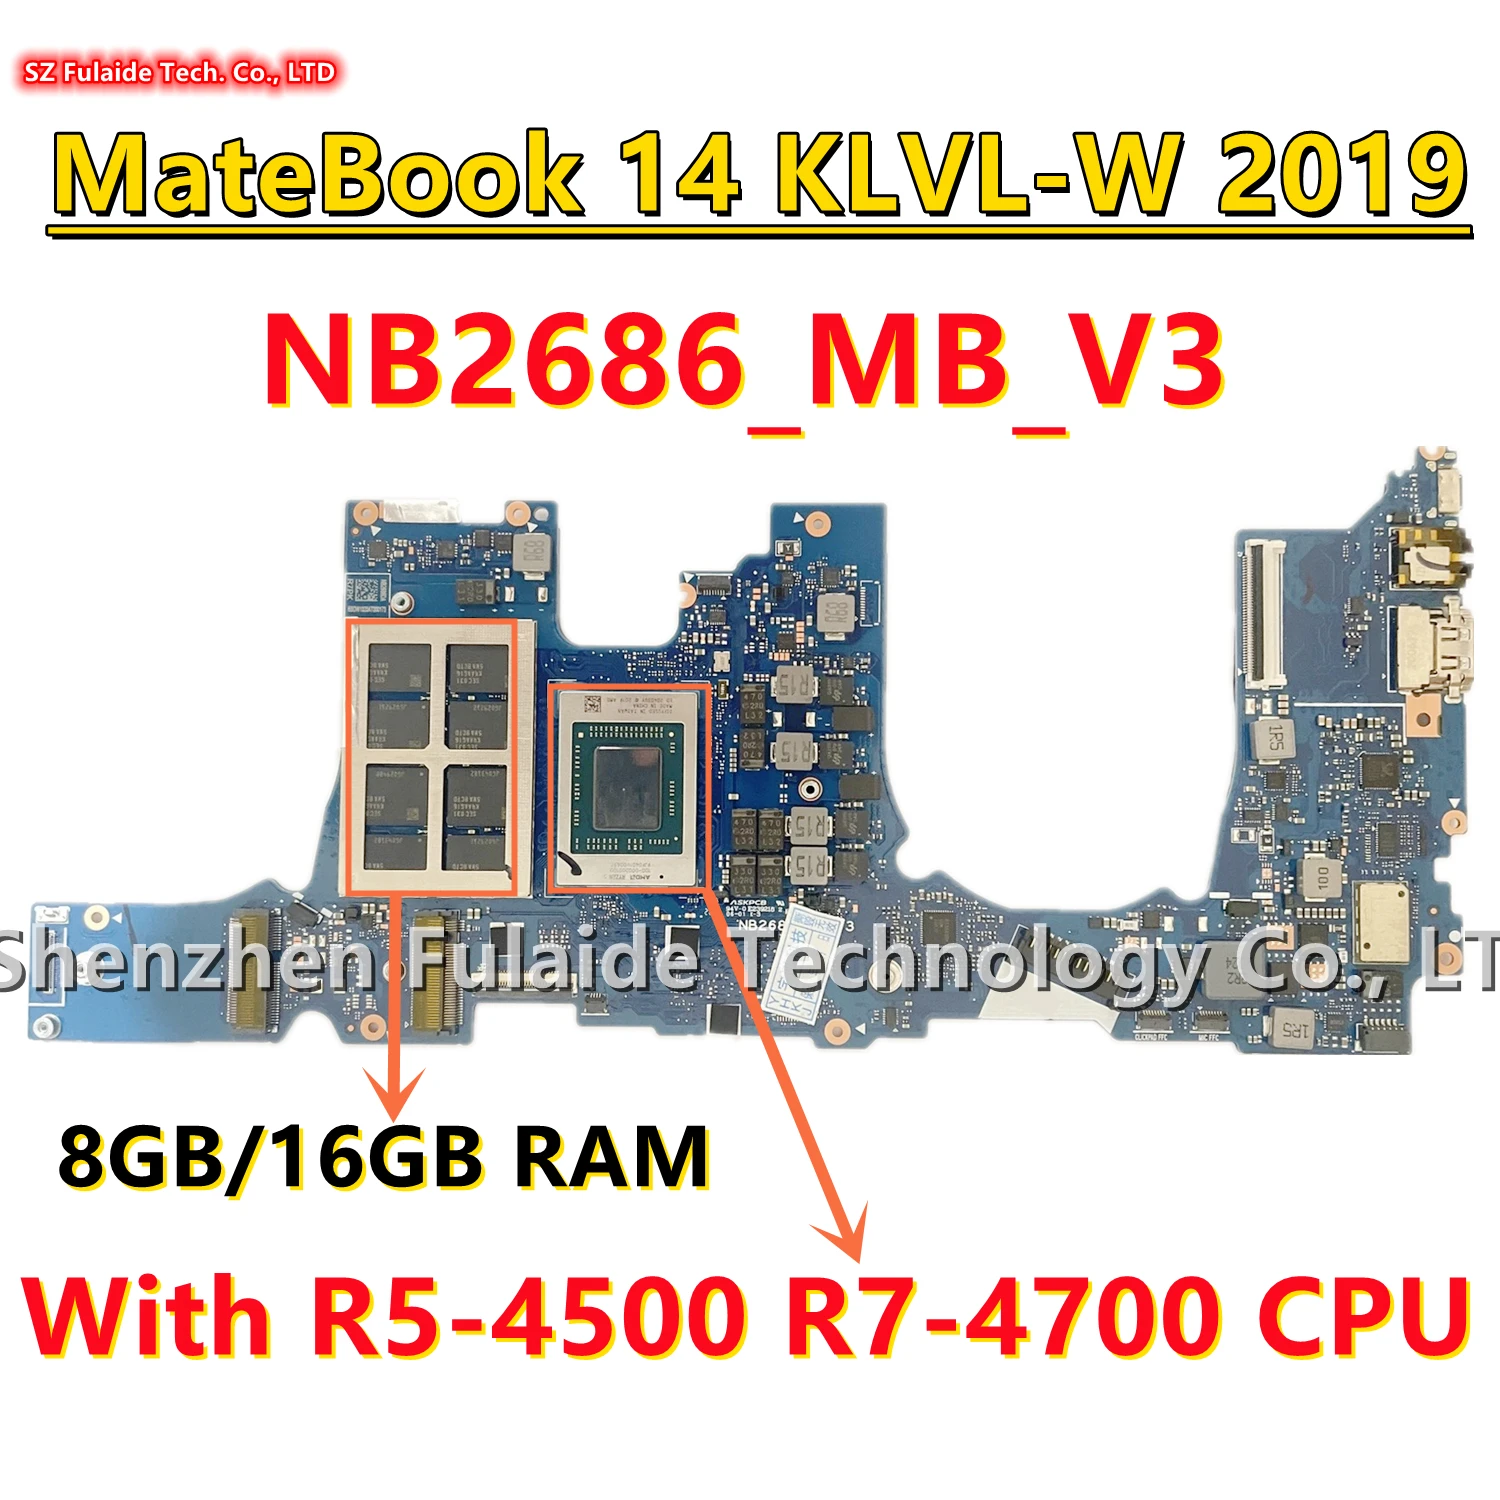 

NB2686_MB_V3 For Huawei MateBook D14 14 KLVL-W 2019 Laptop Motherboard With R5-4500 R7-4700 CPU 8GB/16GB RAM 100% Tested Well